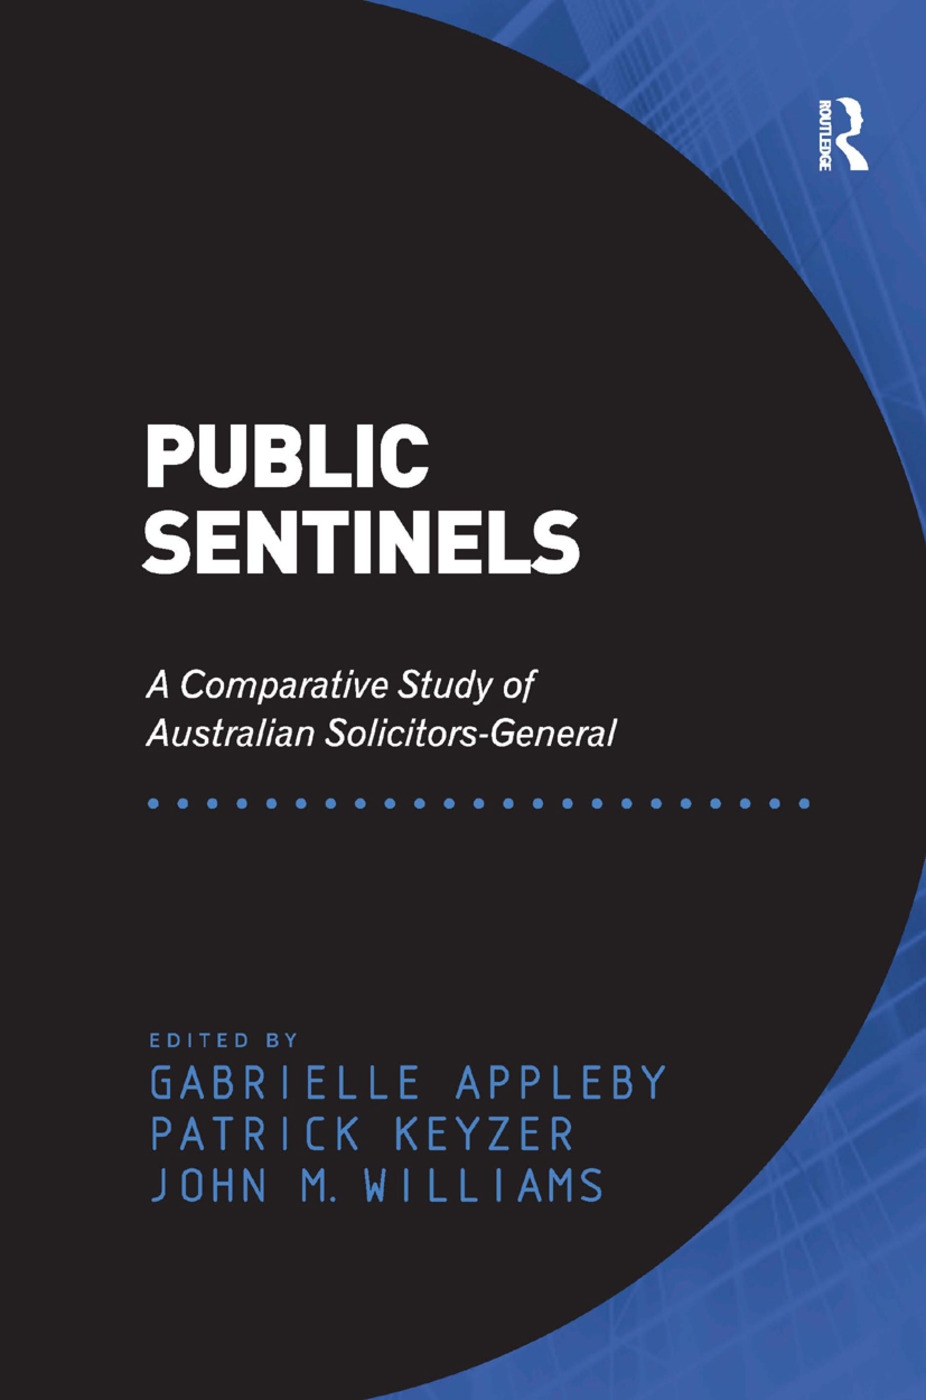 Public Sentinels: A Comparative Study of Australian Solicitors-General. Edited by Gabrielle Appleby, Patrick Keyzer, John M. Williams